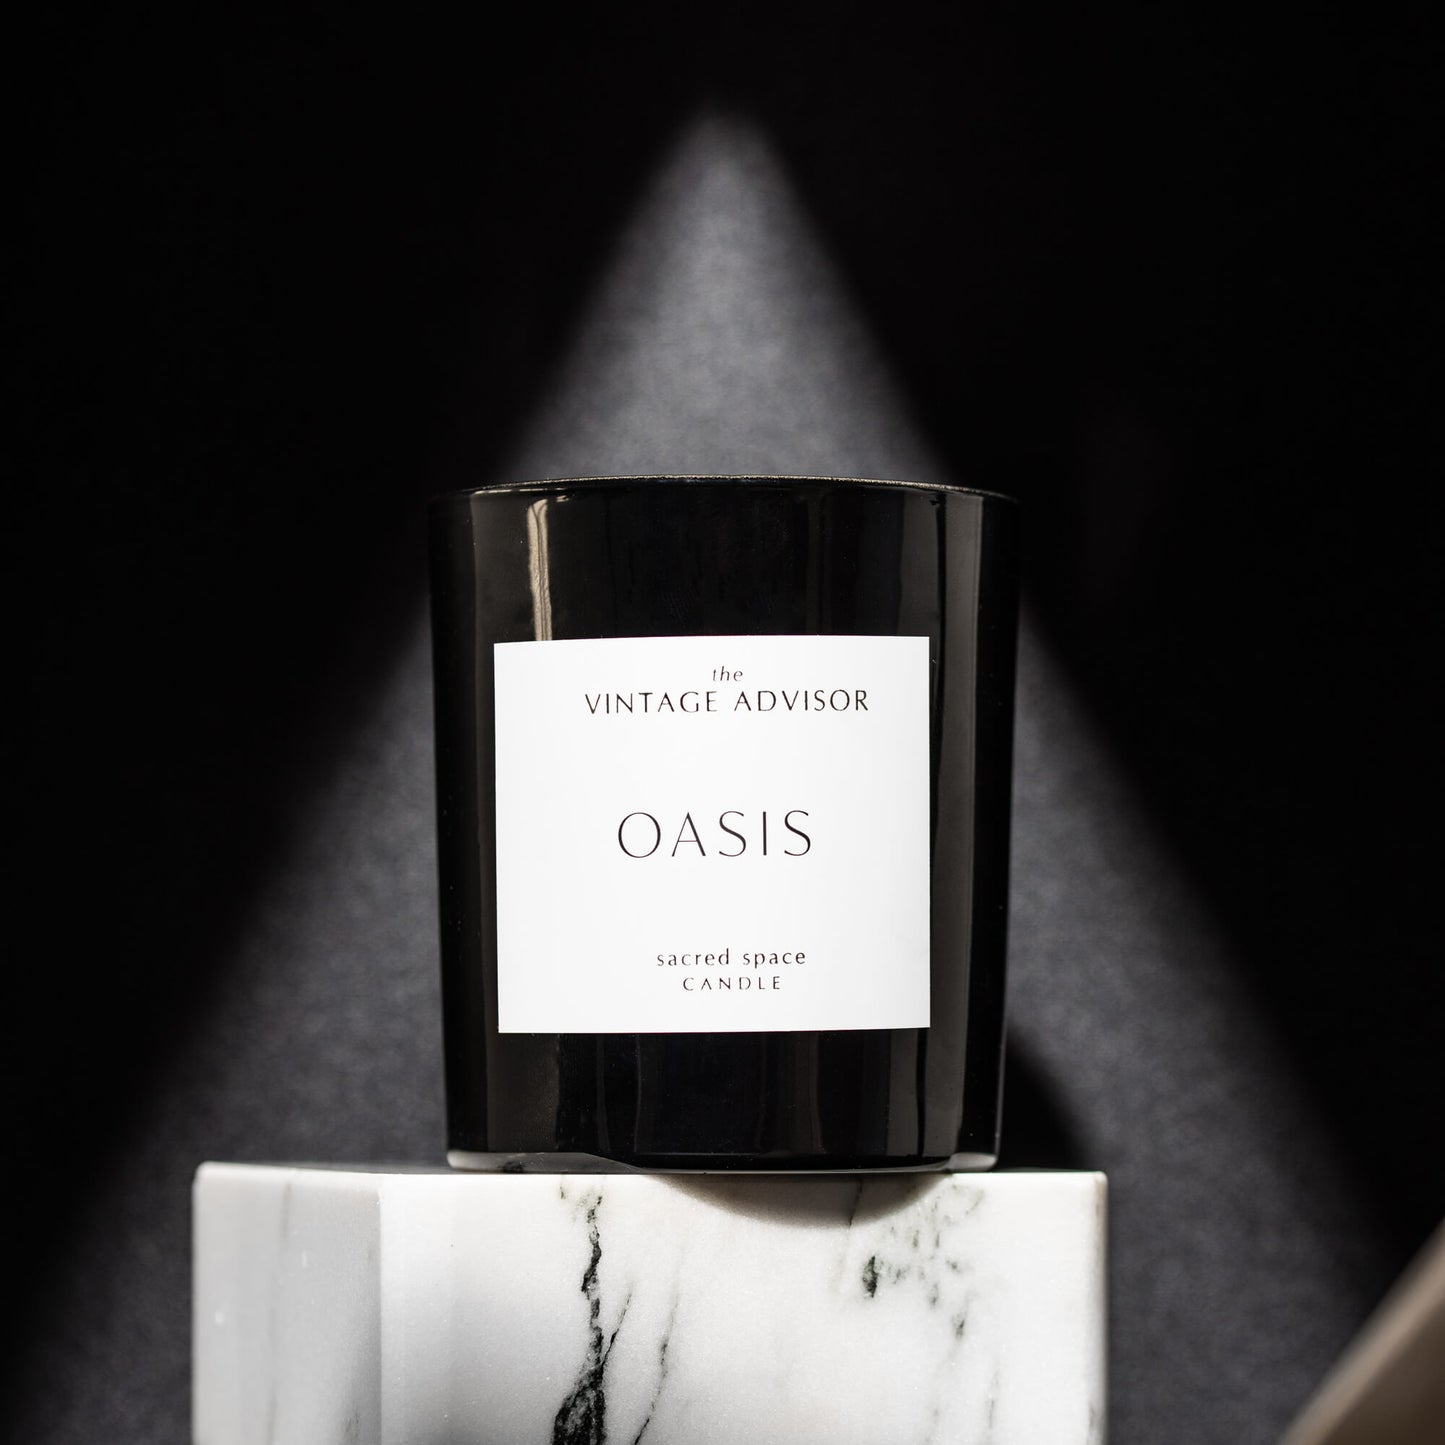 Oasis candle - The Vintage Advisor